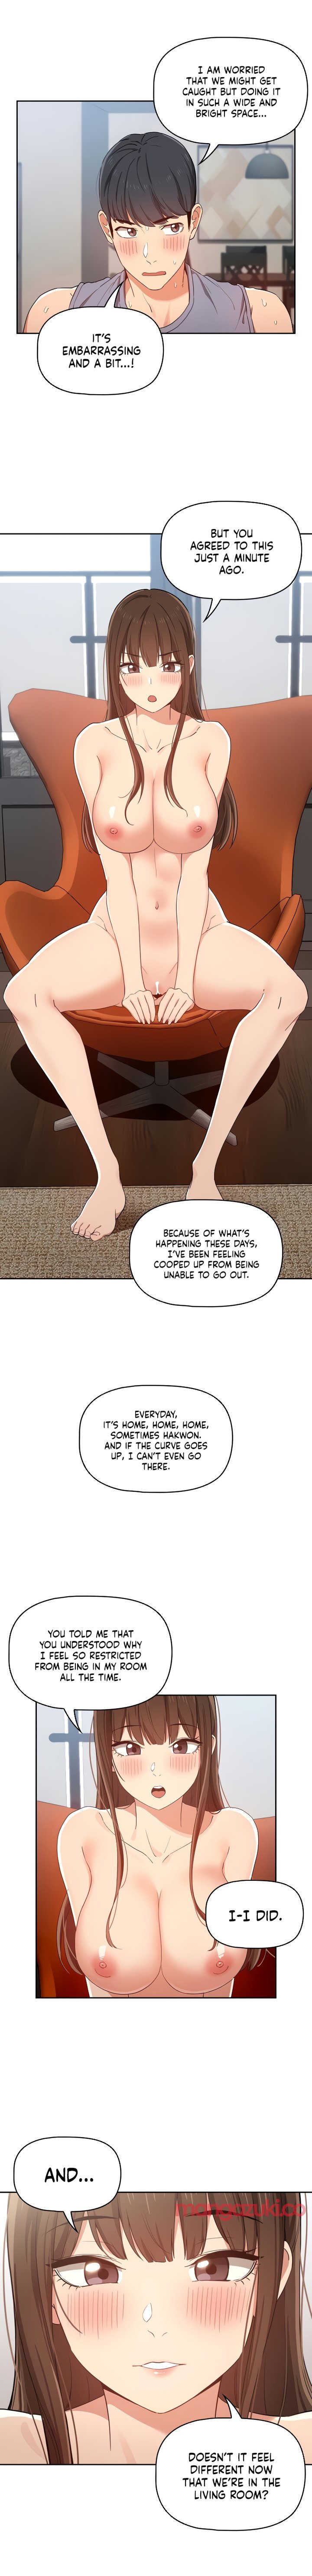 Private Tutoring in These Trying Times - Chapter 19 Page 5